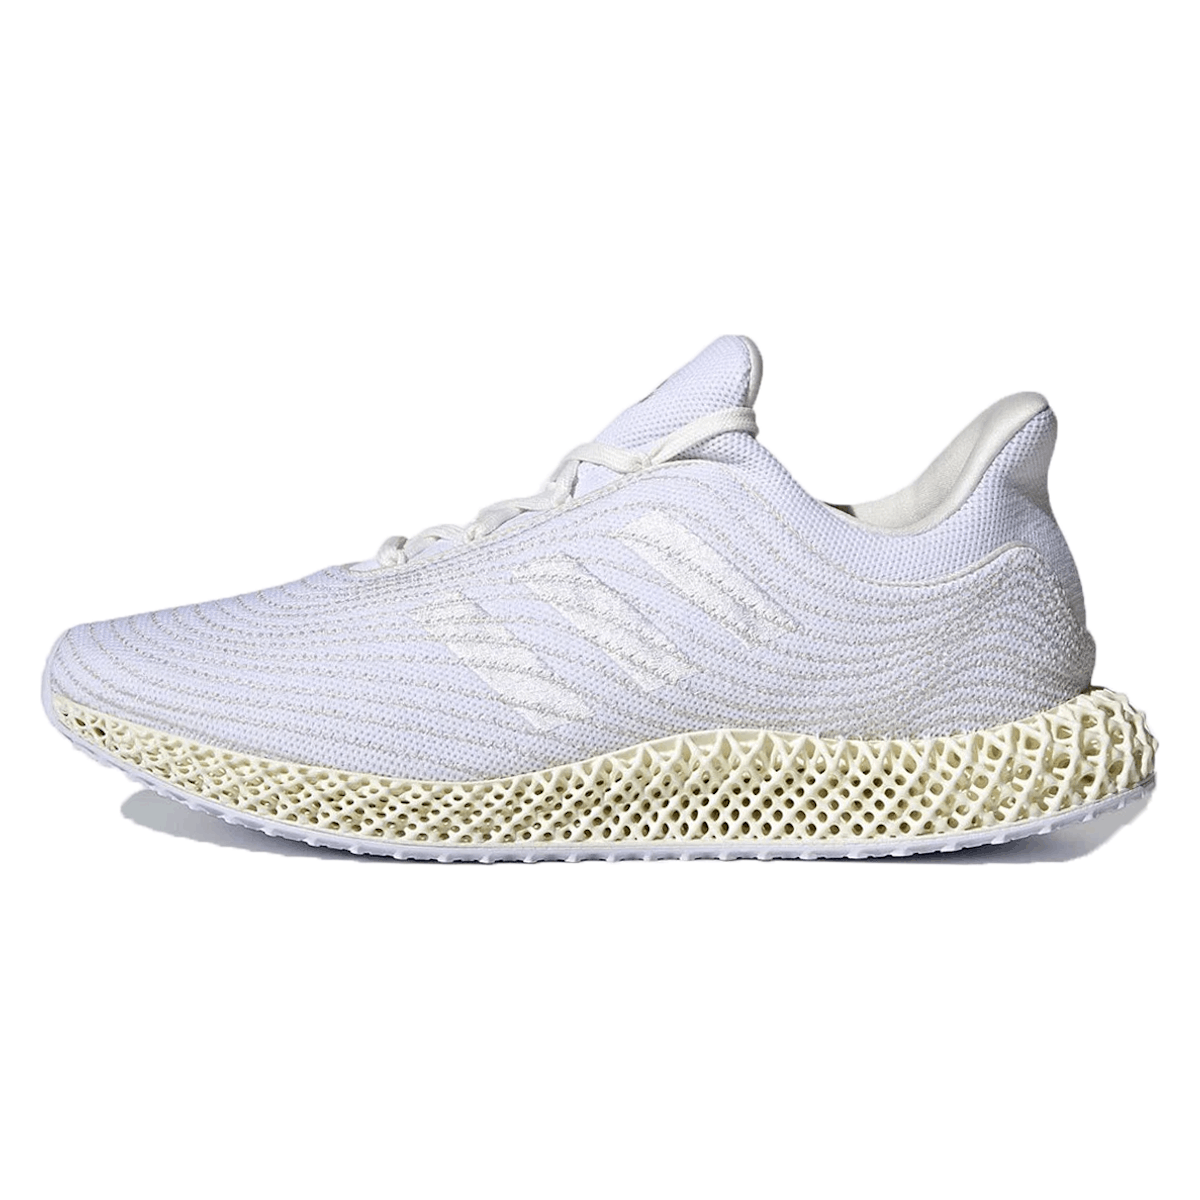 adidas Ultra 4D Parley White